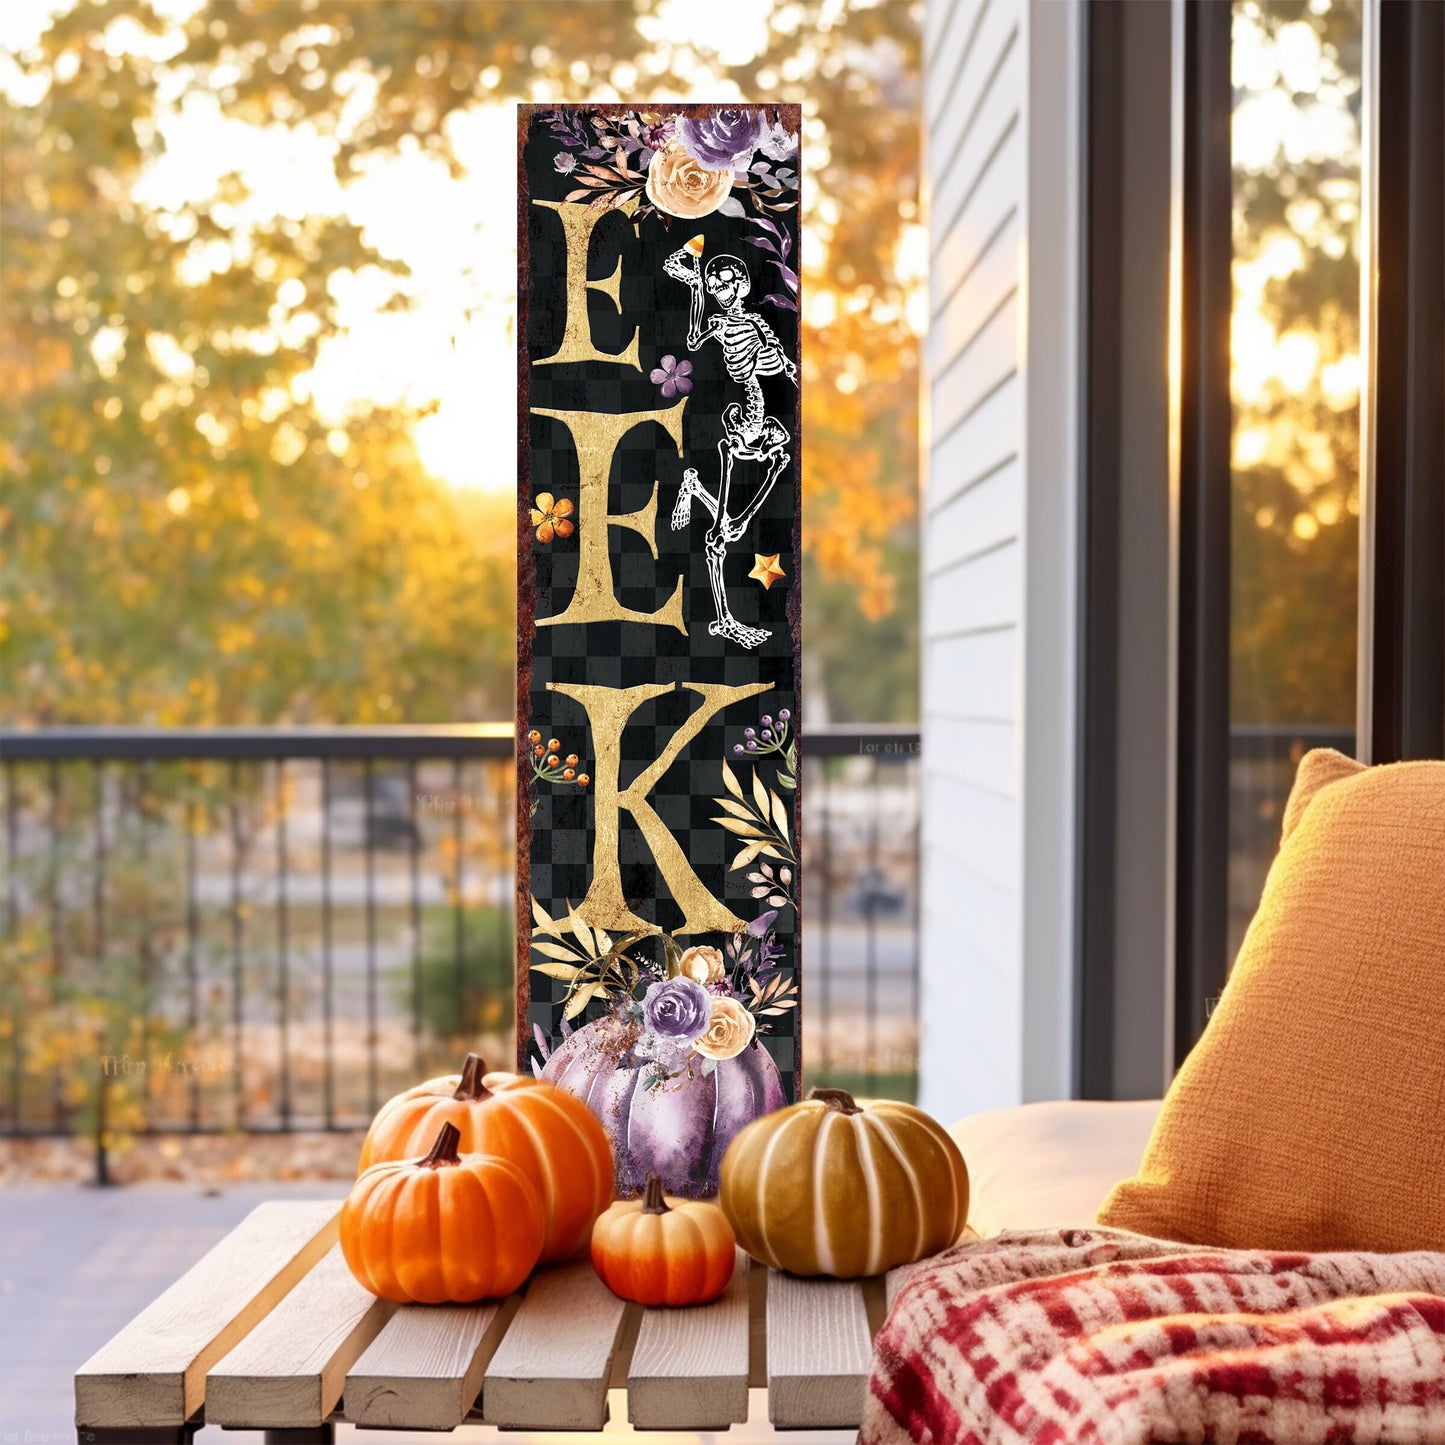 36in "EEK" Halloween Porch Sign - Front Porch Halloween Welcome Sign, Vintage Halloween Decoration, Rustic Modern Farmhouse Entryway Board